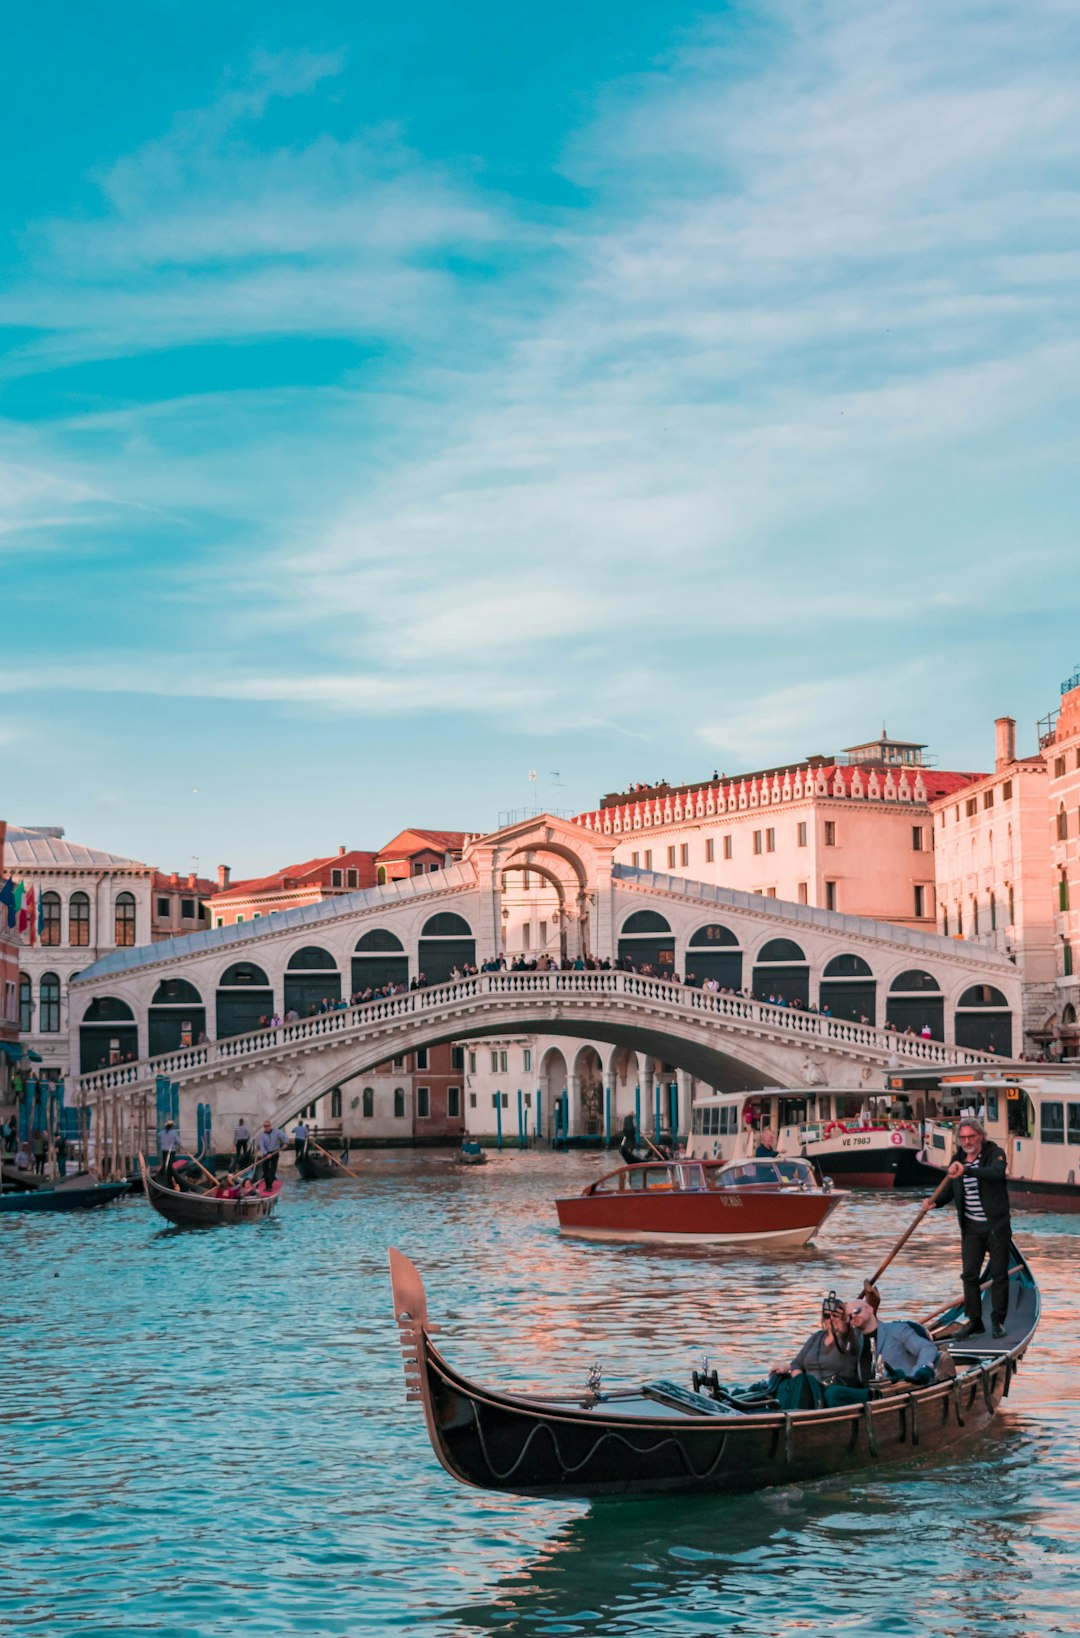 Travel Tips and Stories of Rialto Bridge in Italy